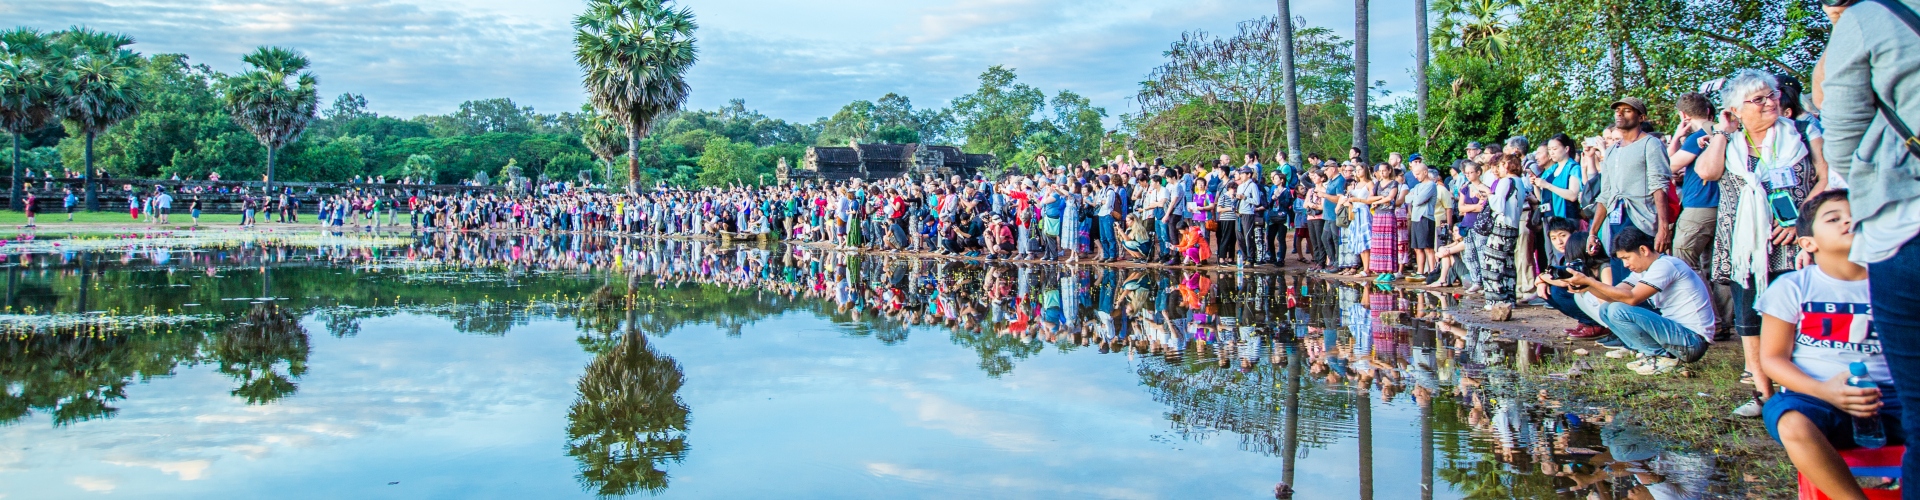 A large crowd of people crowded around a lake in Cambodia